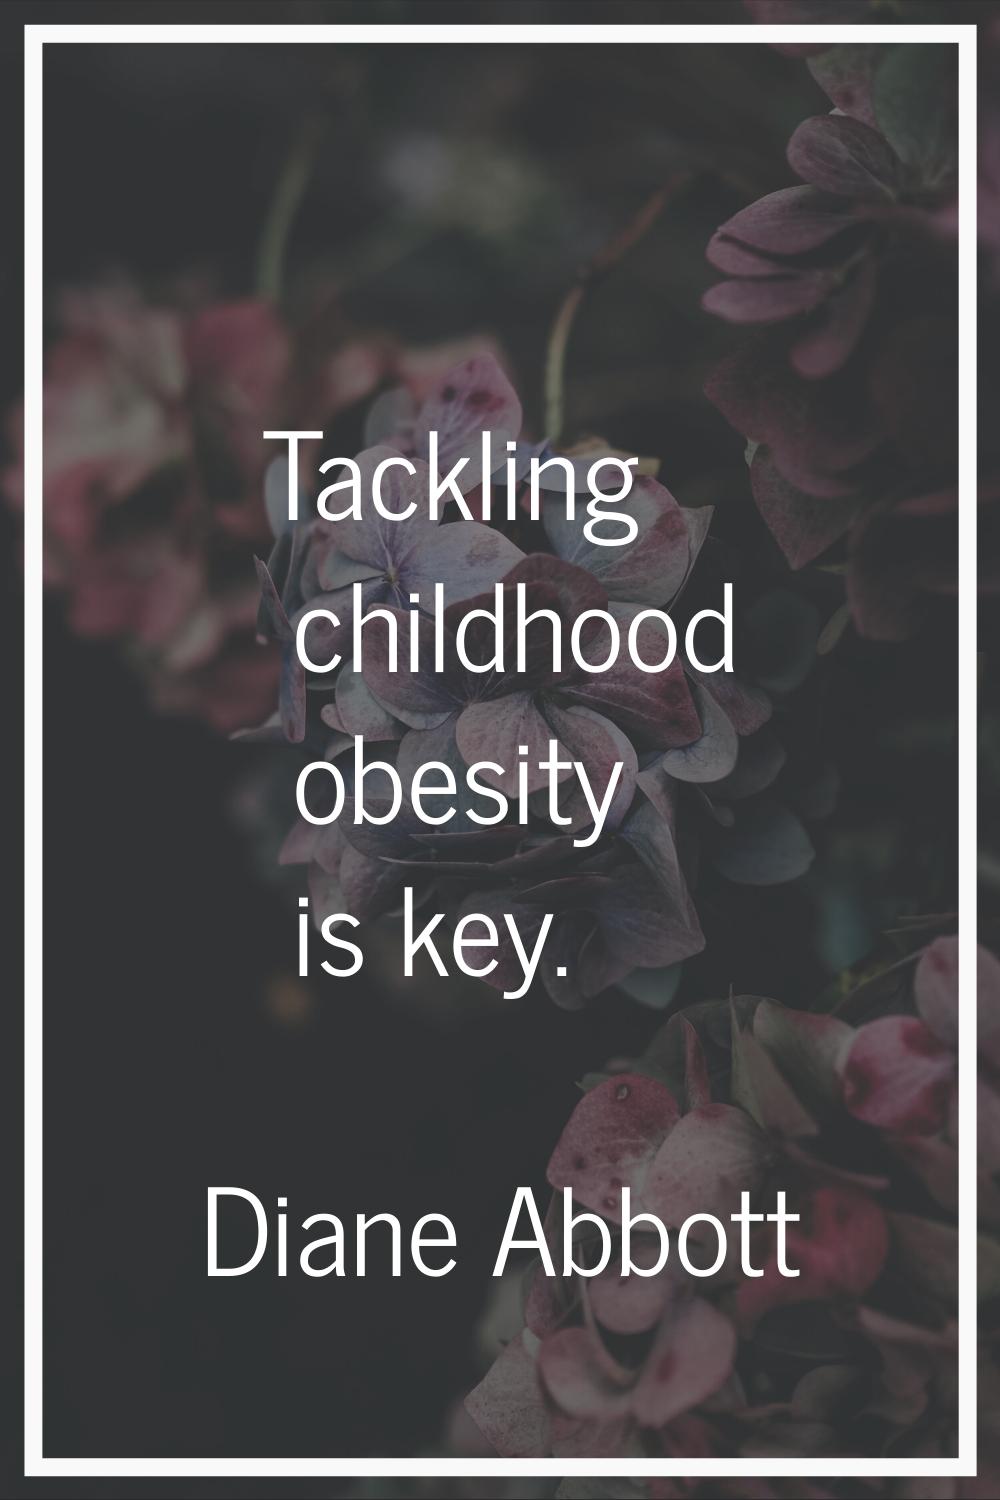 Tackling childhood obesity is key.